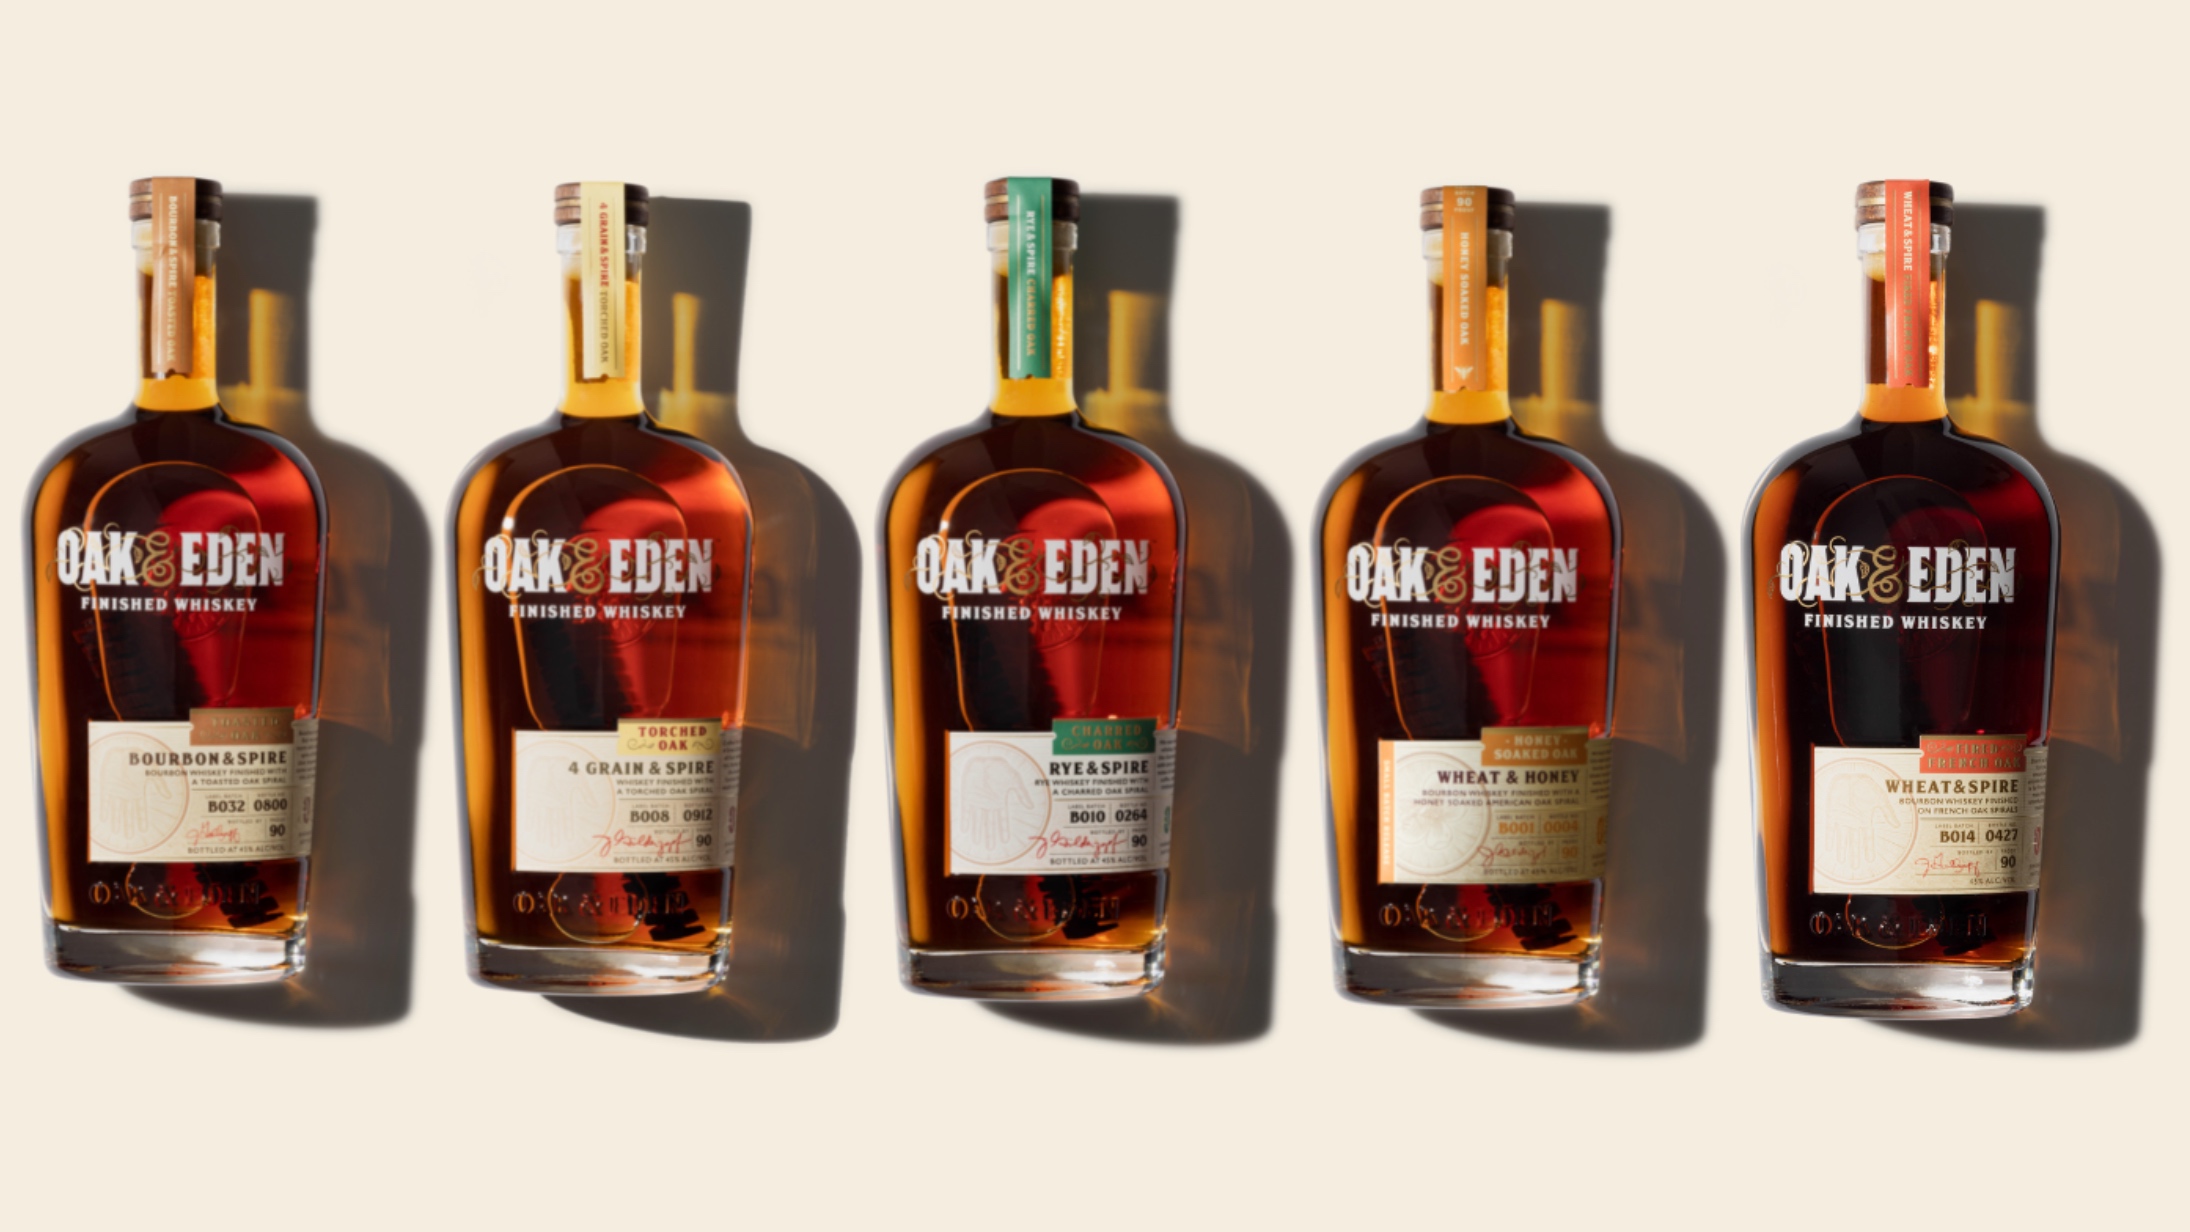 Oak and Eden finished whiskies